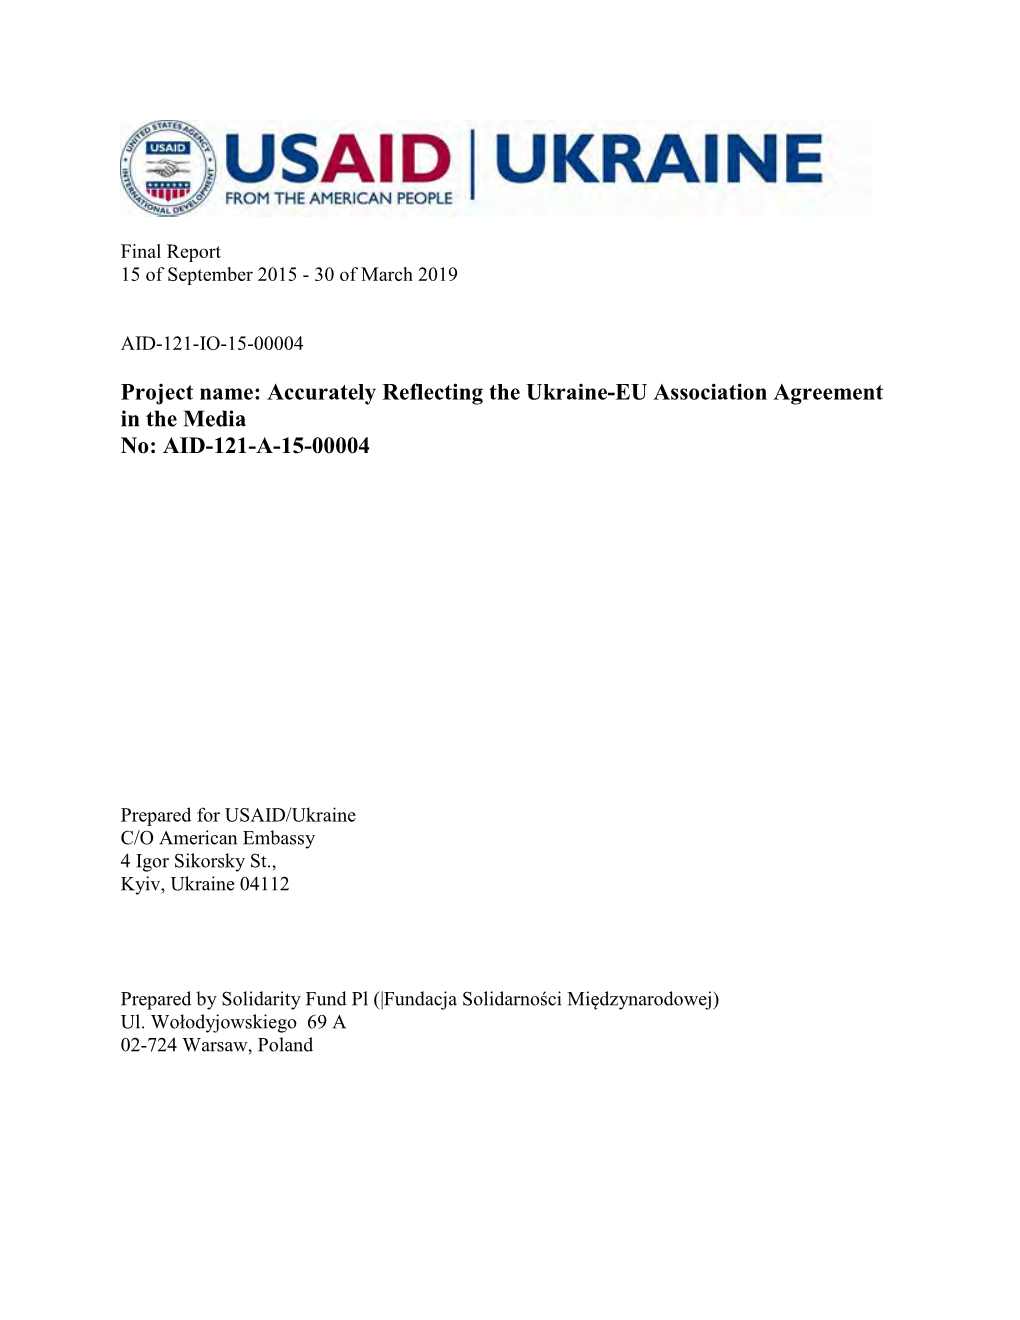 Accurately Reflecting the Ukraine-EU Association Agreement in the Media No: AID-121-A-15-00004